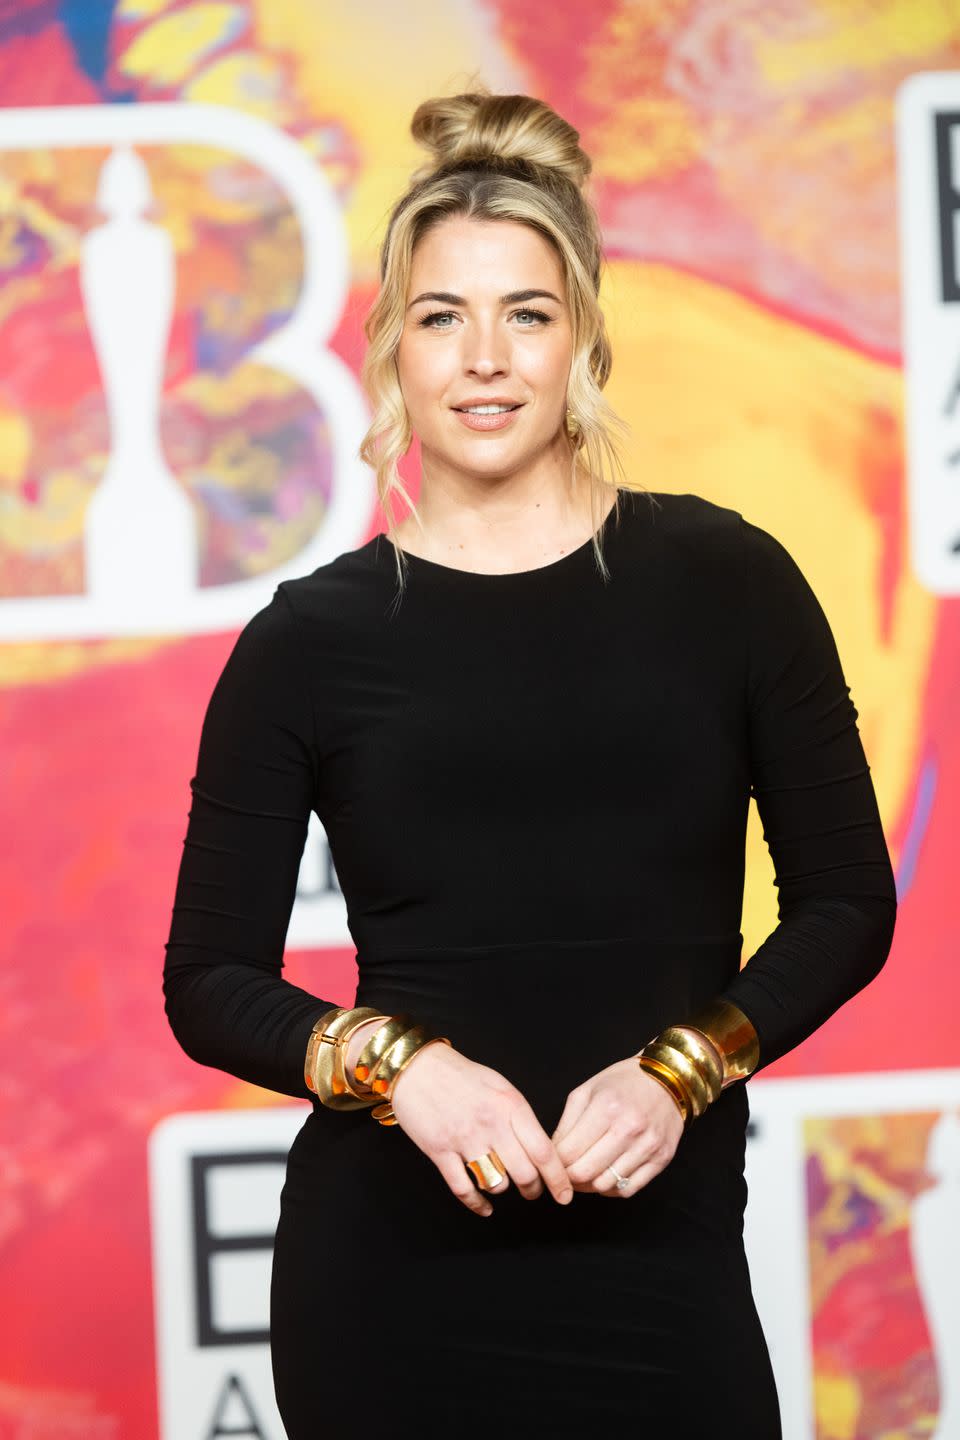 gemma atkinson wearing a black long sleeve dress and her hair in an up do